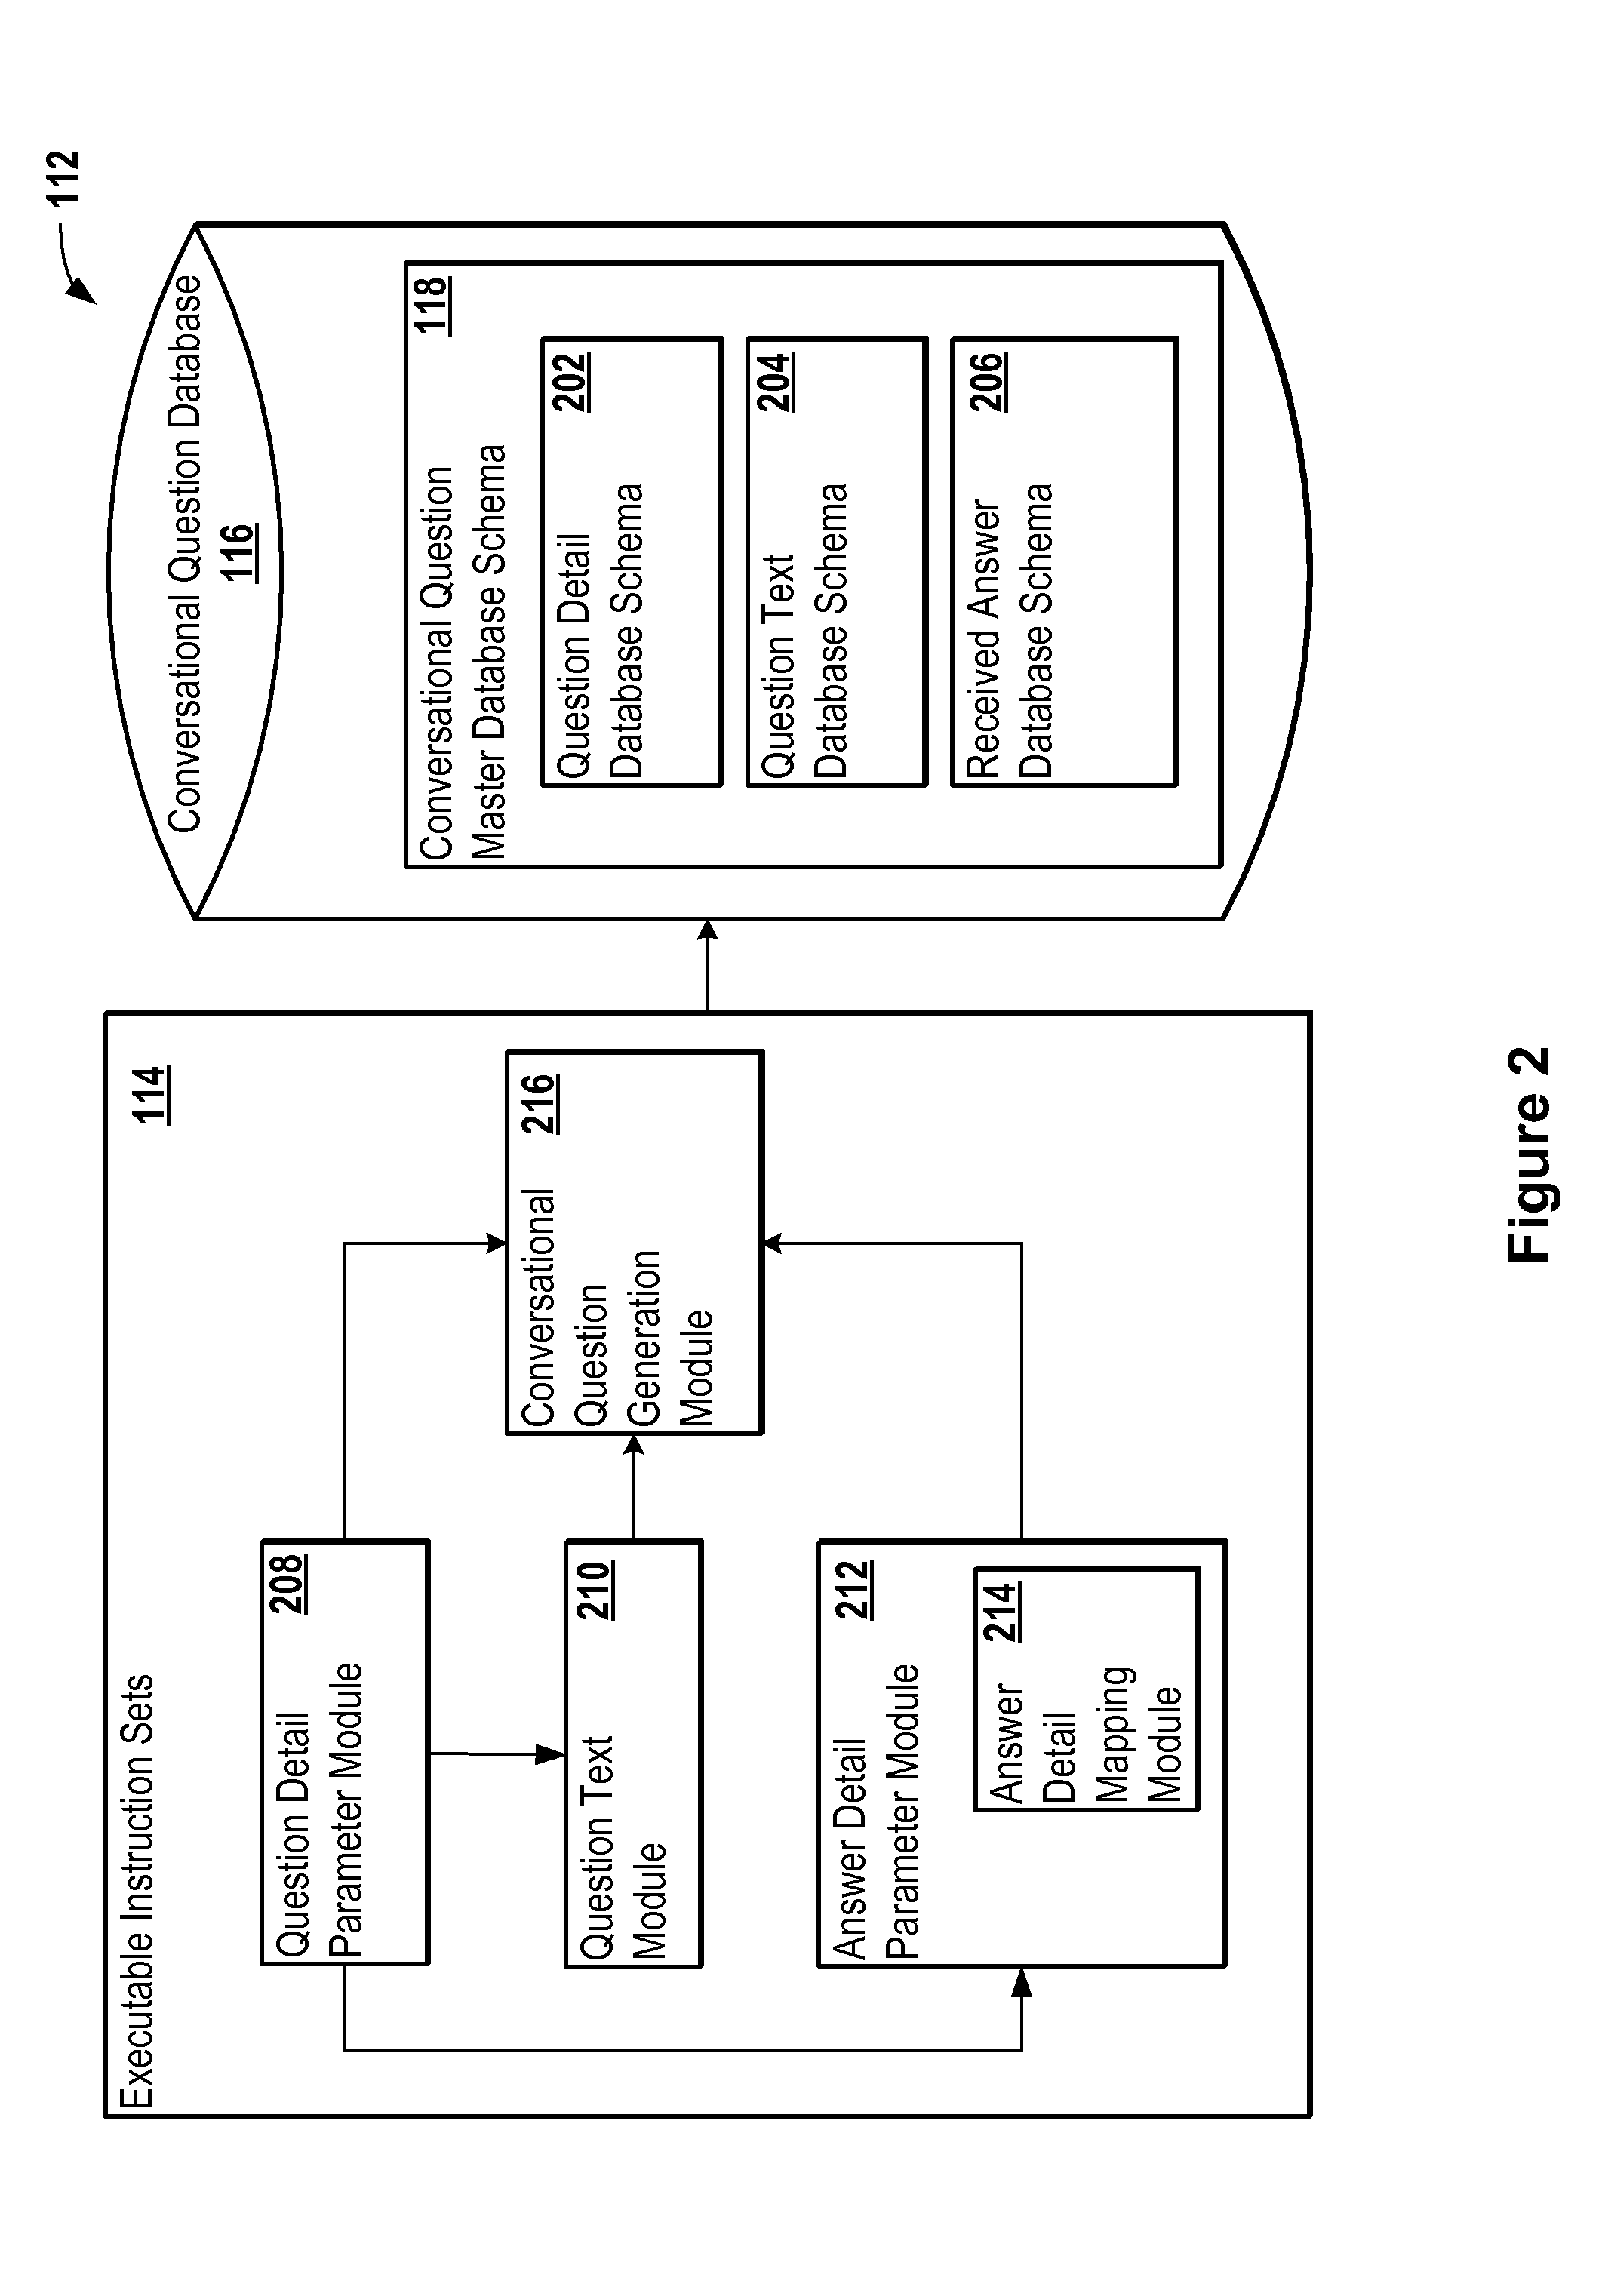 Conversational question generation system adapted for an insurance claim processing system